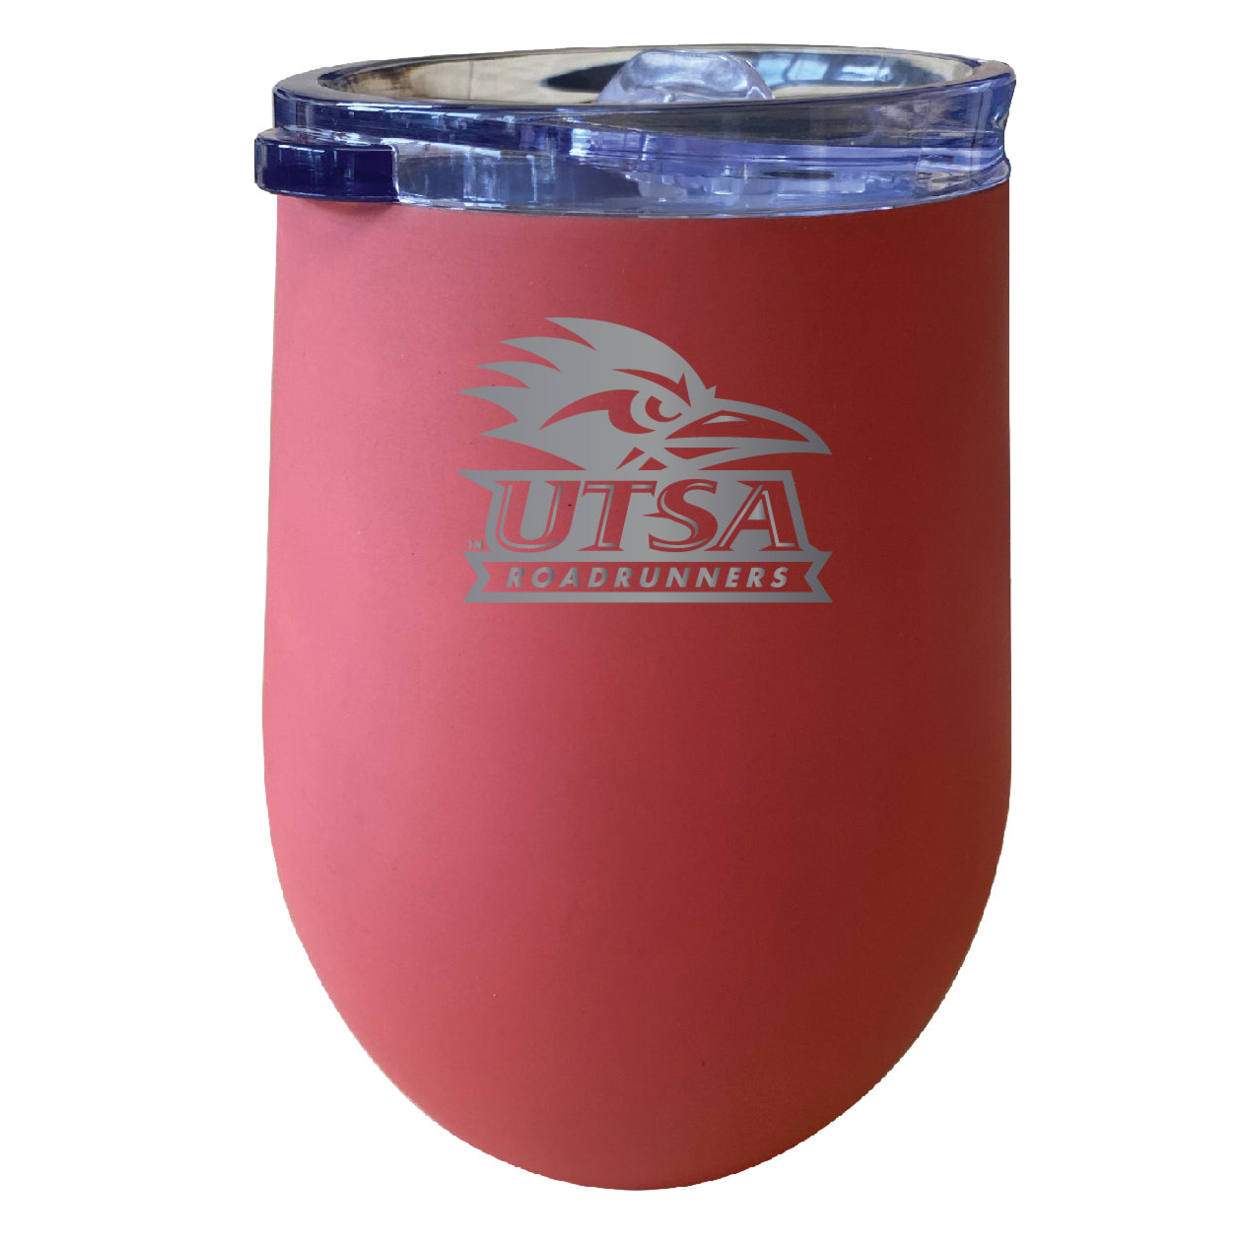 UTSA Road Runners 12 Oz Etched Insulated Wine Stainless Steel Tumbler - Choose Your Color - White